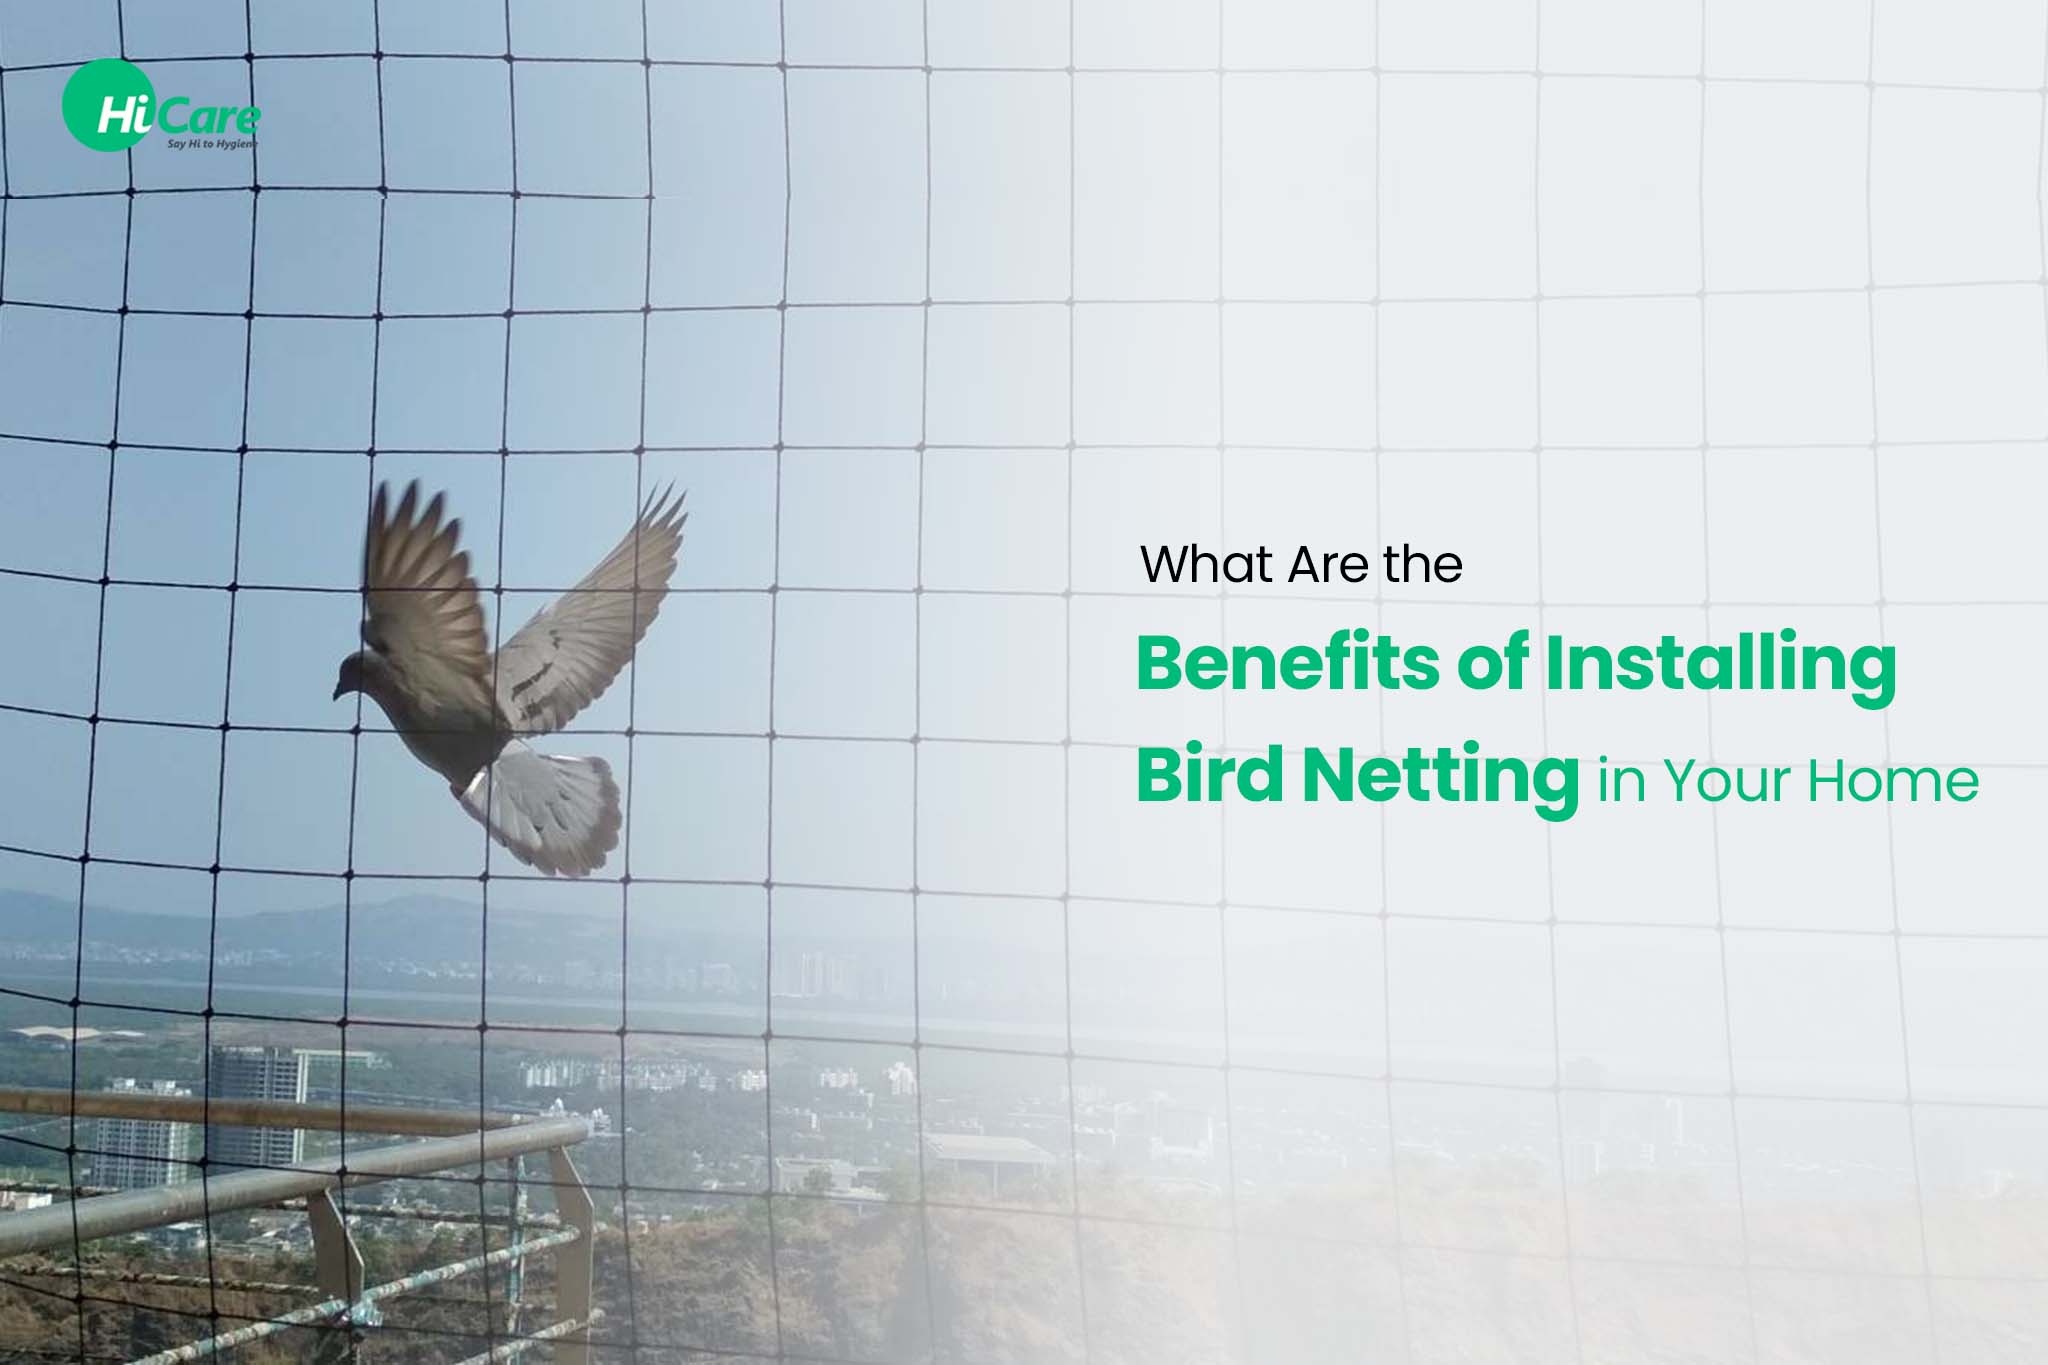 What Are the Benefits of Installing Bird Netting in Your Home?